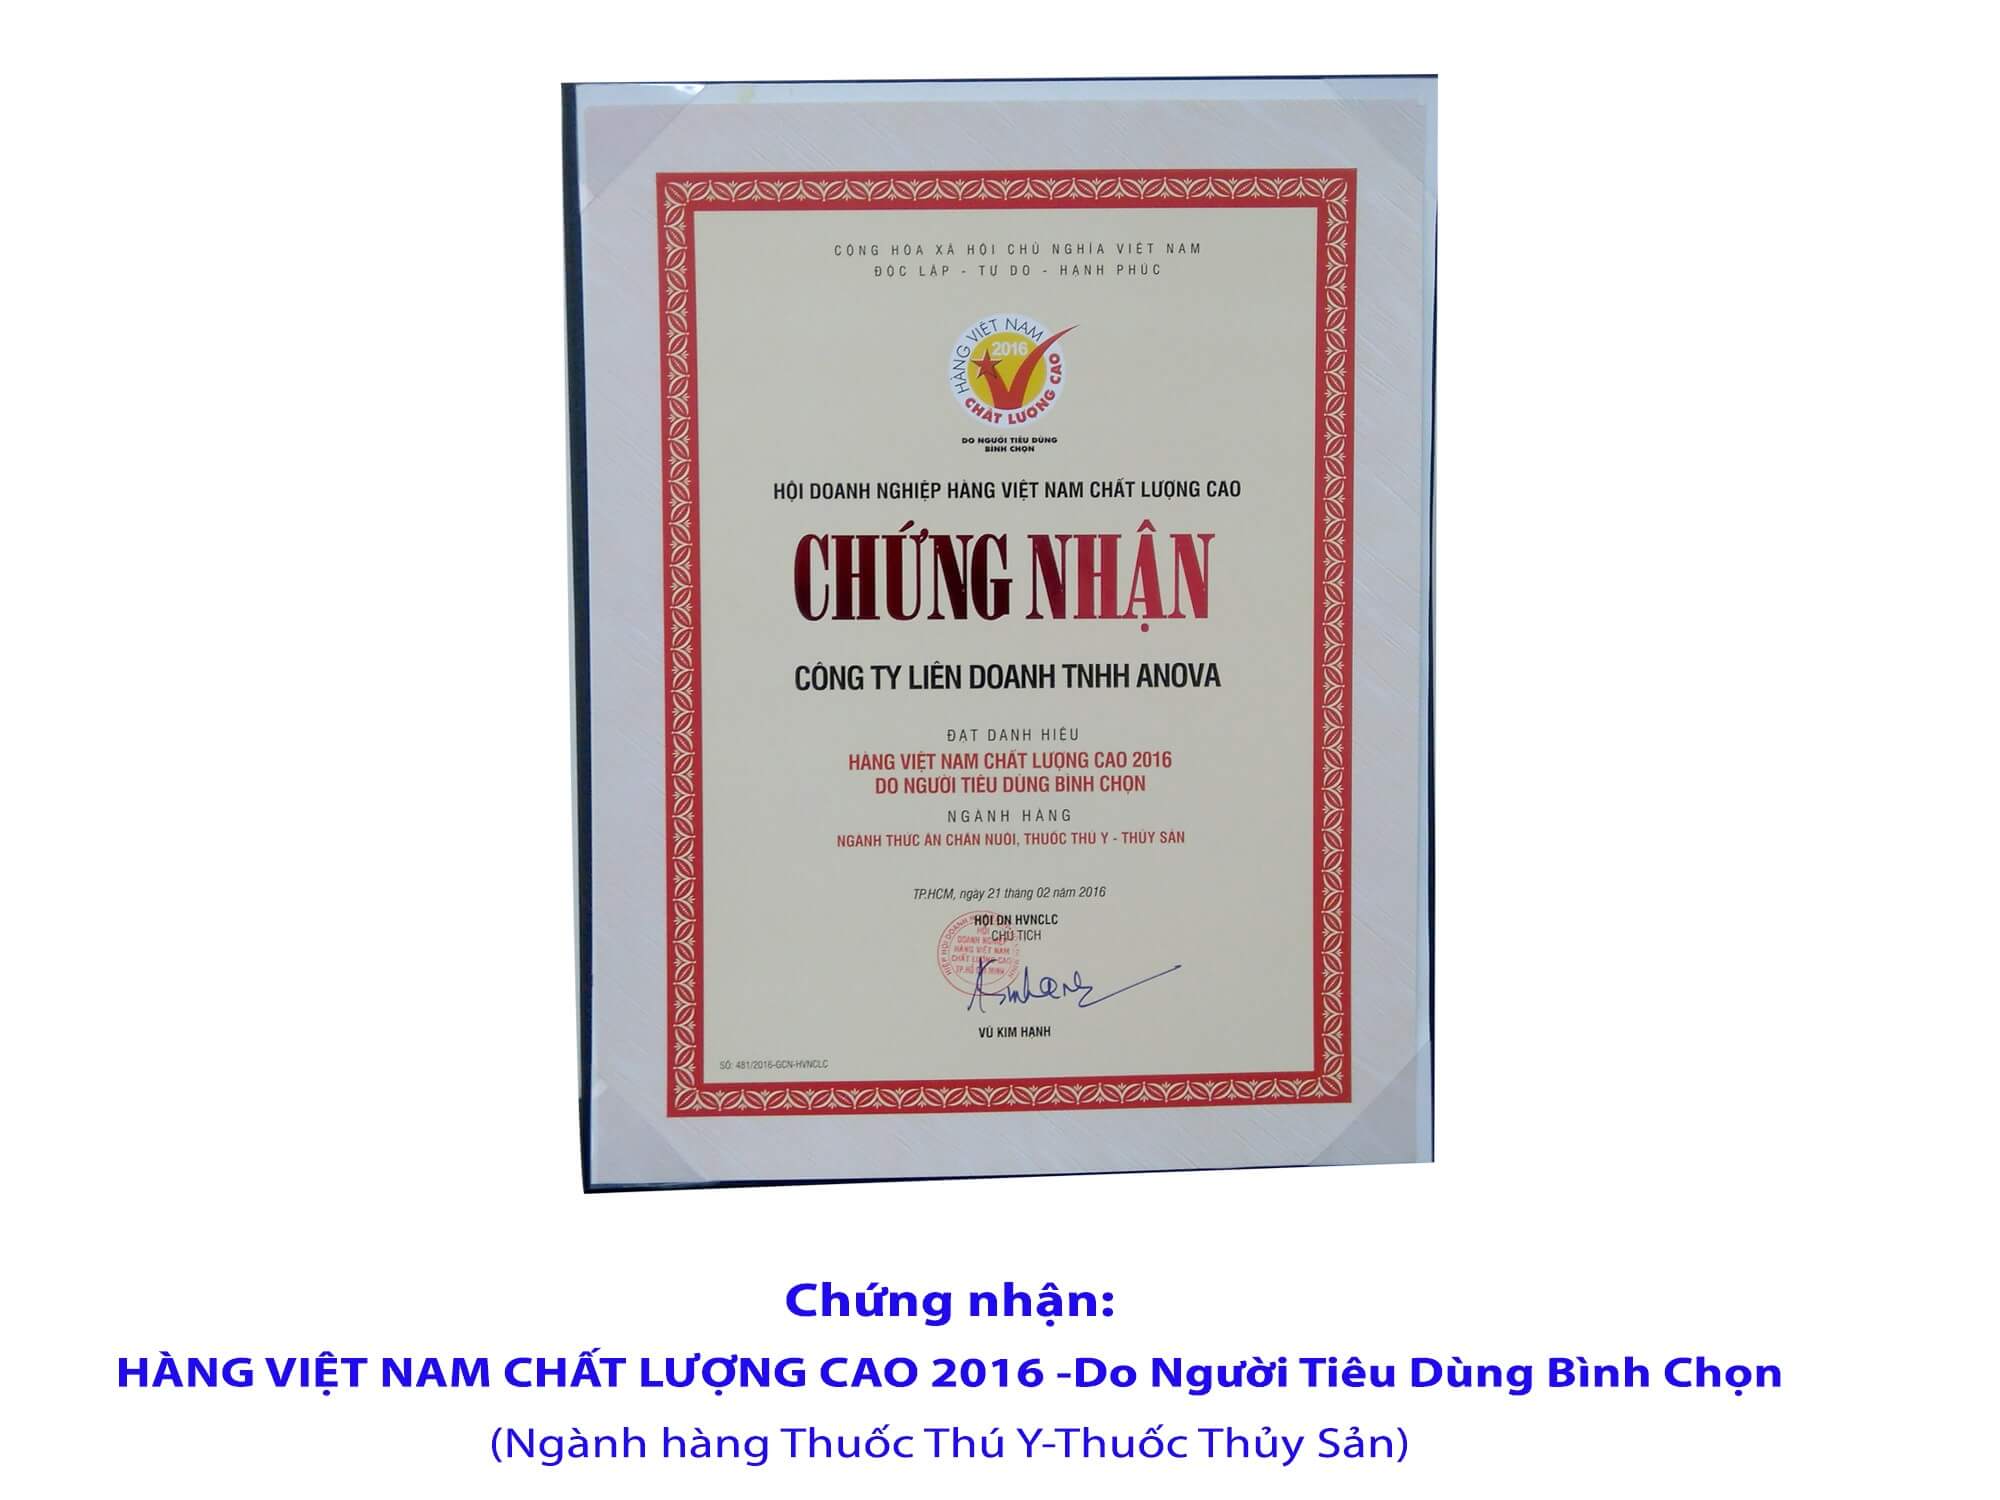 12 years of achieving the Certificate of title "Vietnamese high-quality goods voted by consumers" through 2005, 2006, 2007, 2009, 2010, 2011, 2012, 2013 ,2014, 2015, 2016 and 2017 organized by Marketing World Magazine.